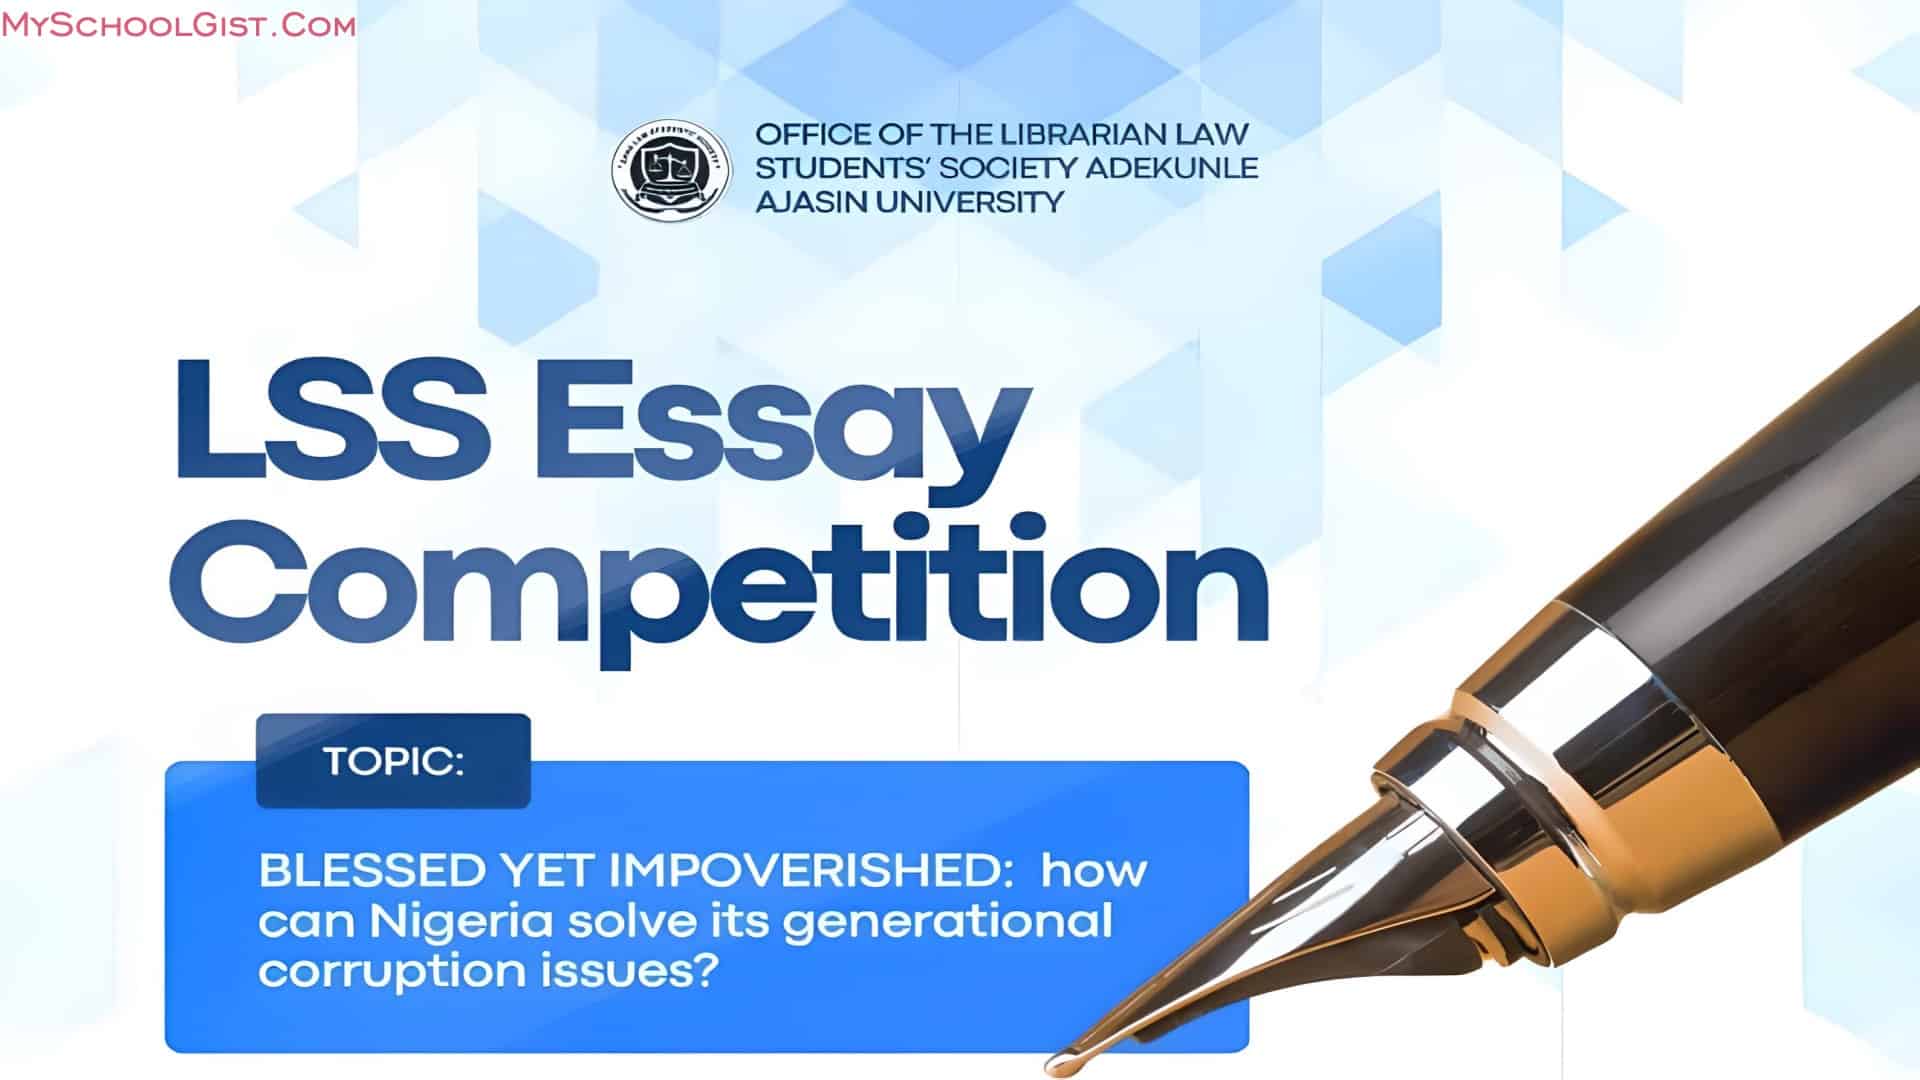 LSS Essay Competition for Law Students at AAUA